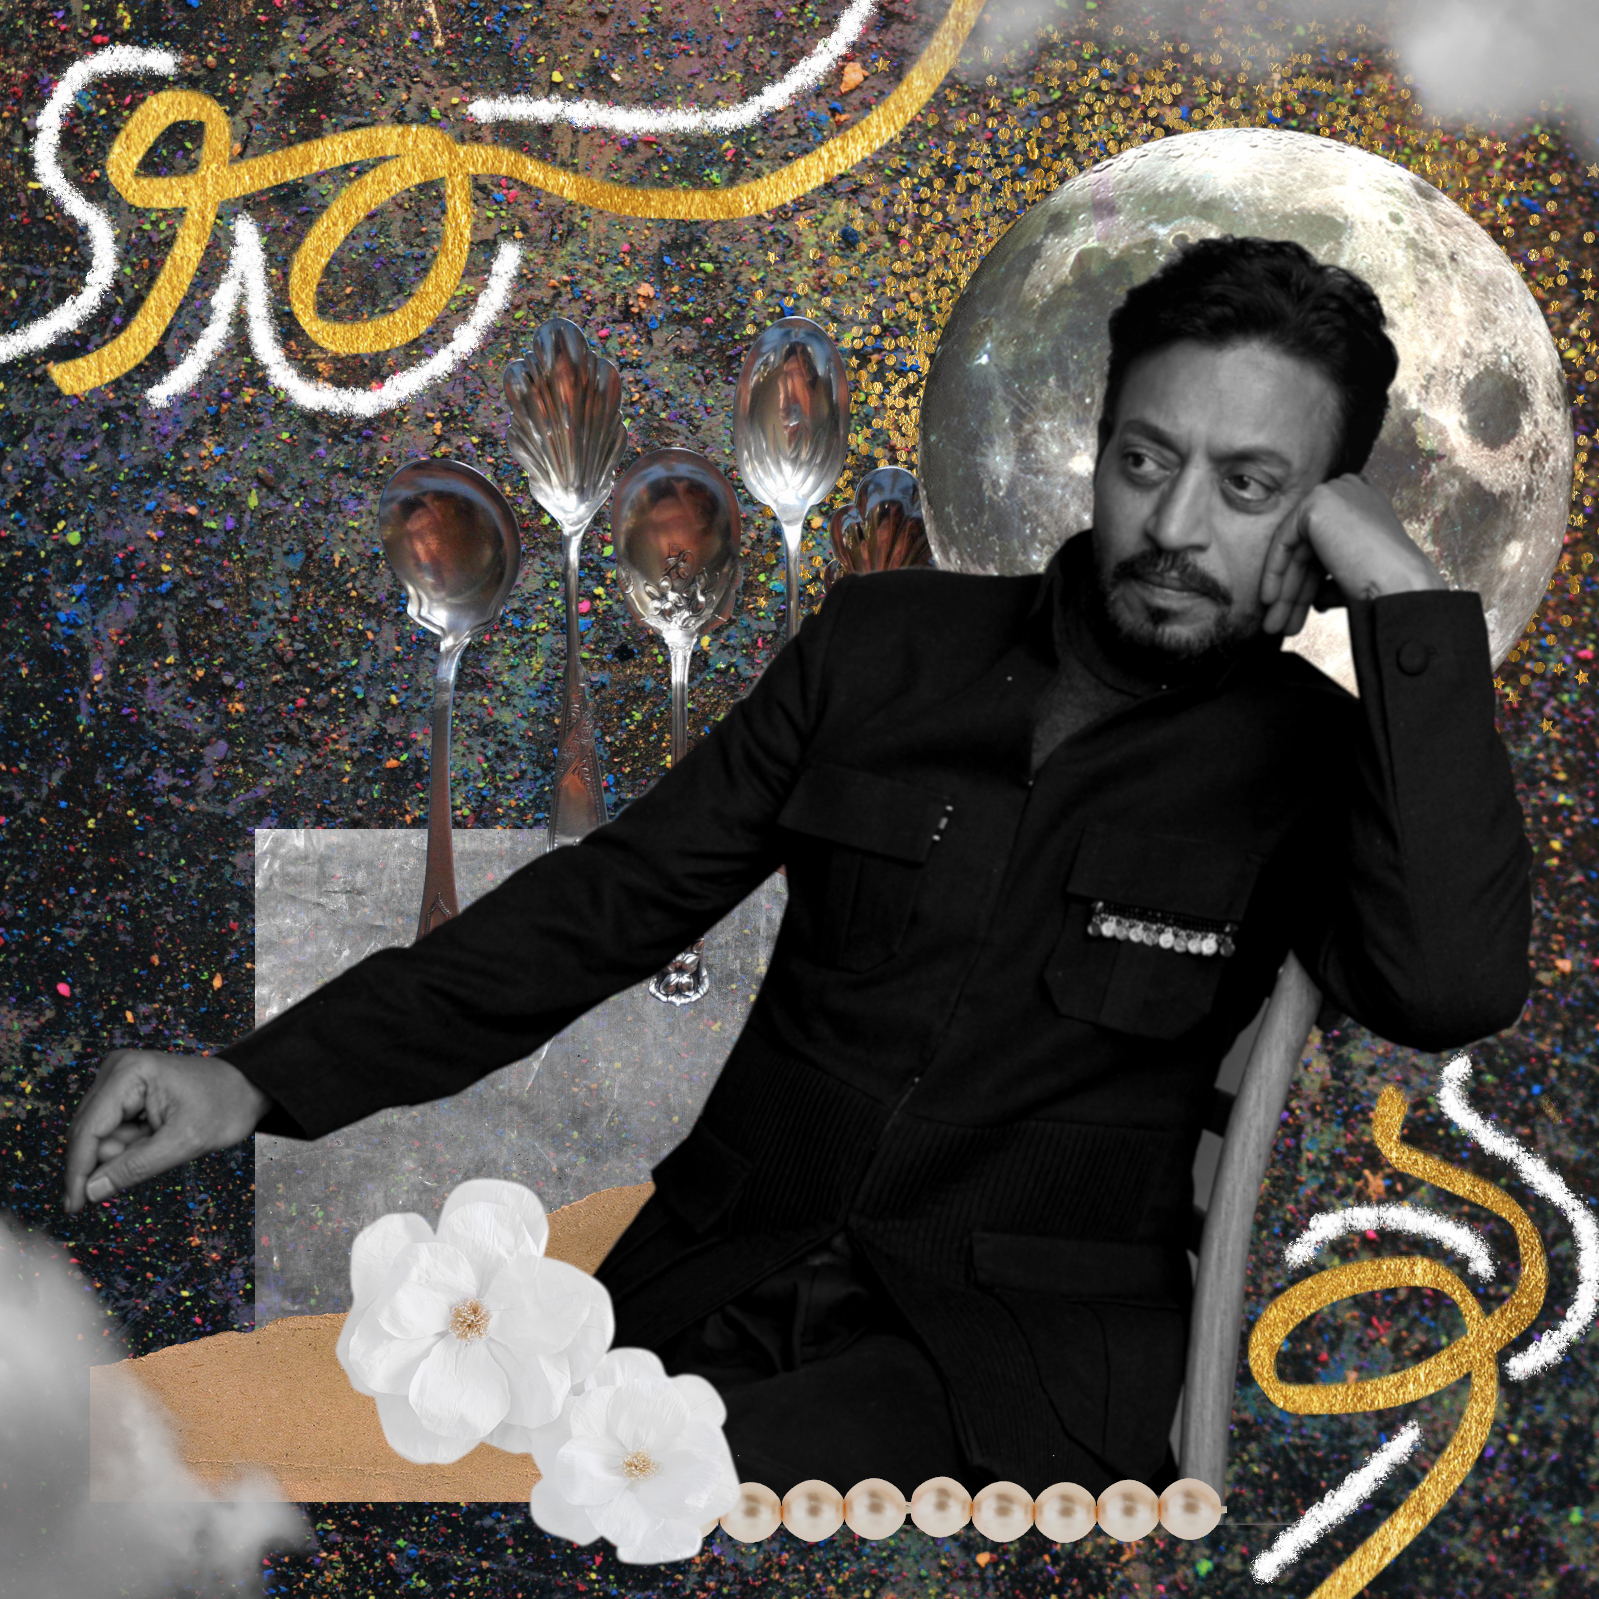 Irrfan Khan, the People’s Actor